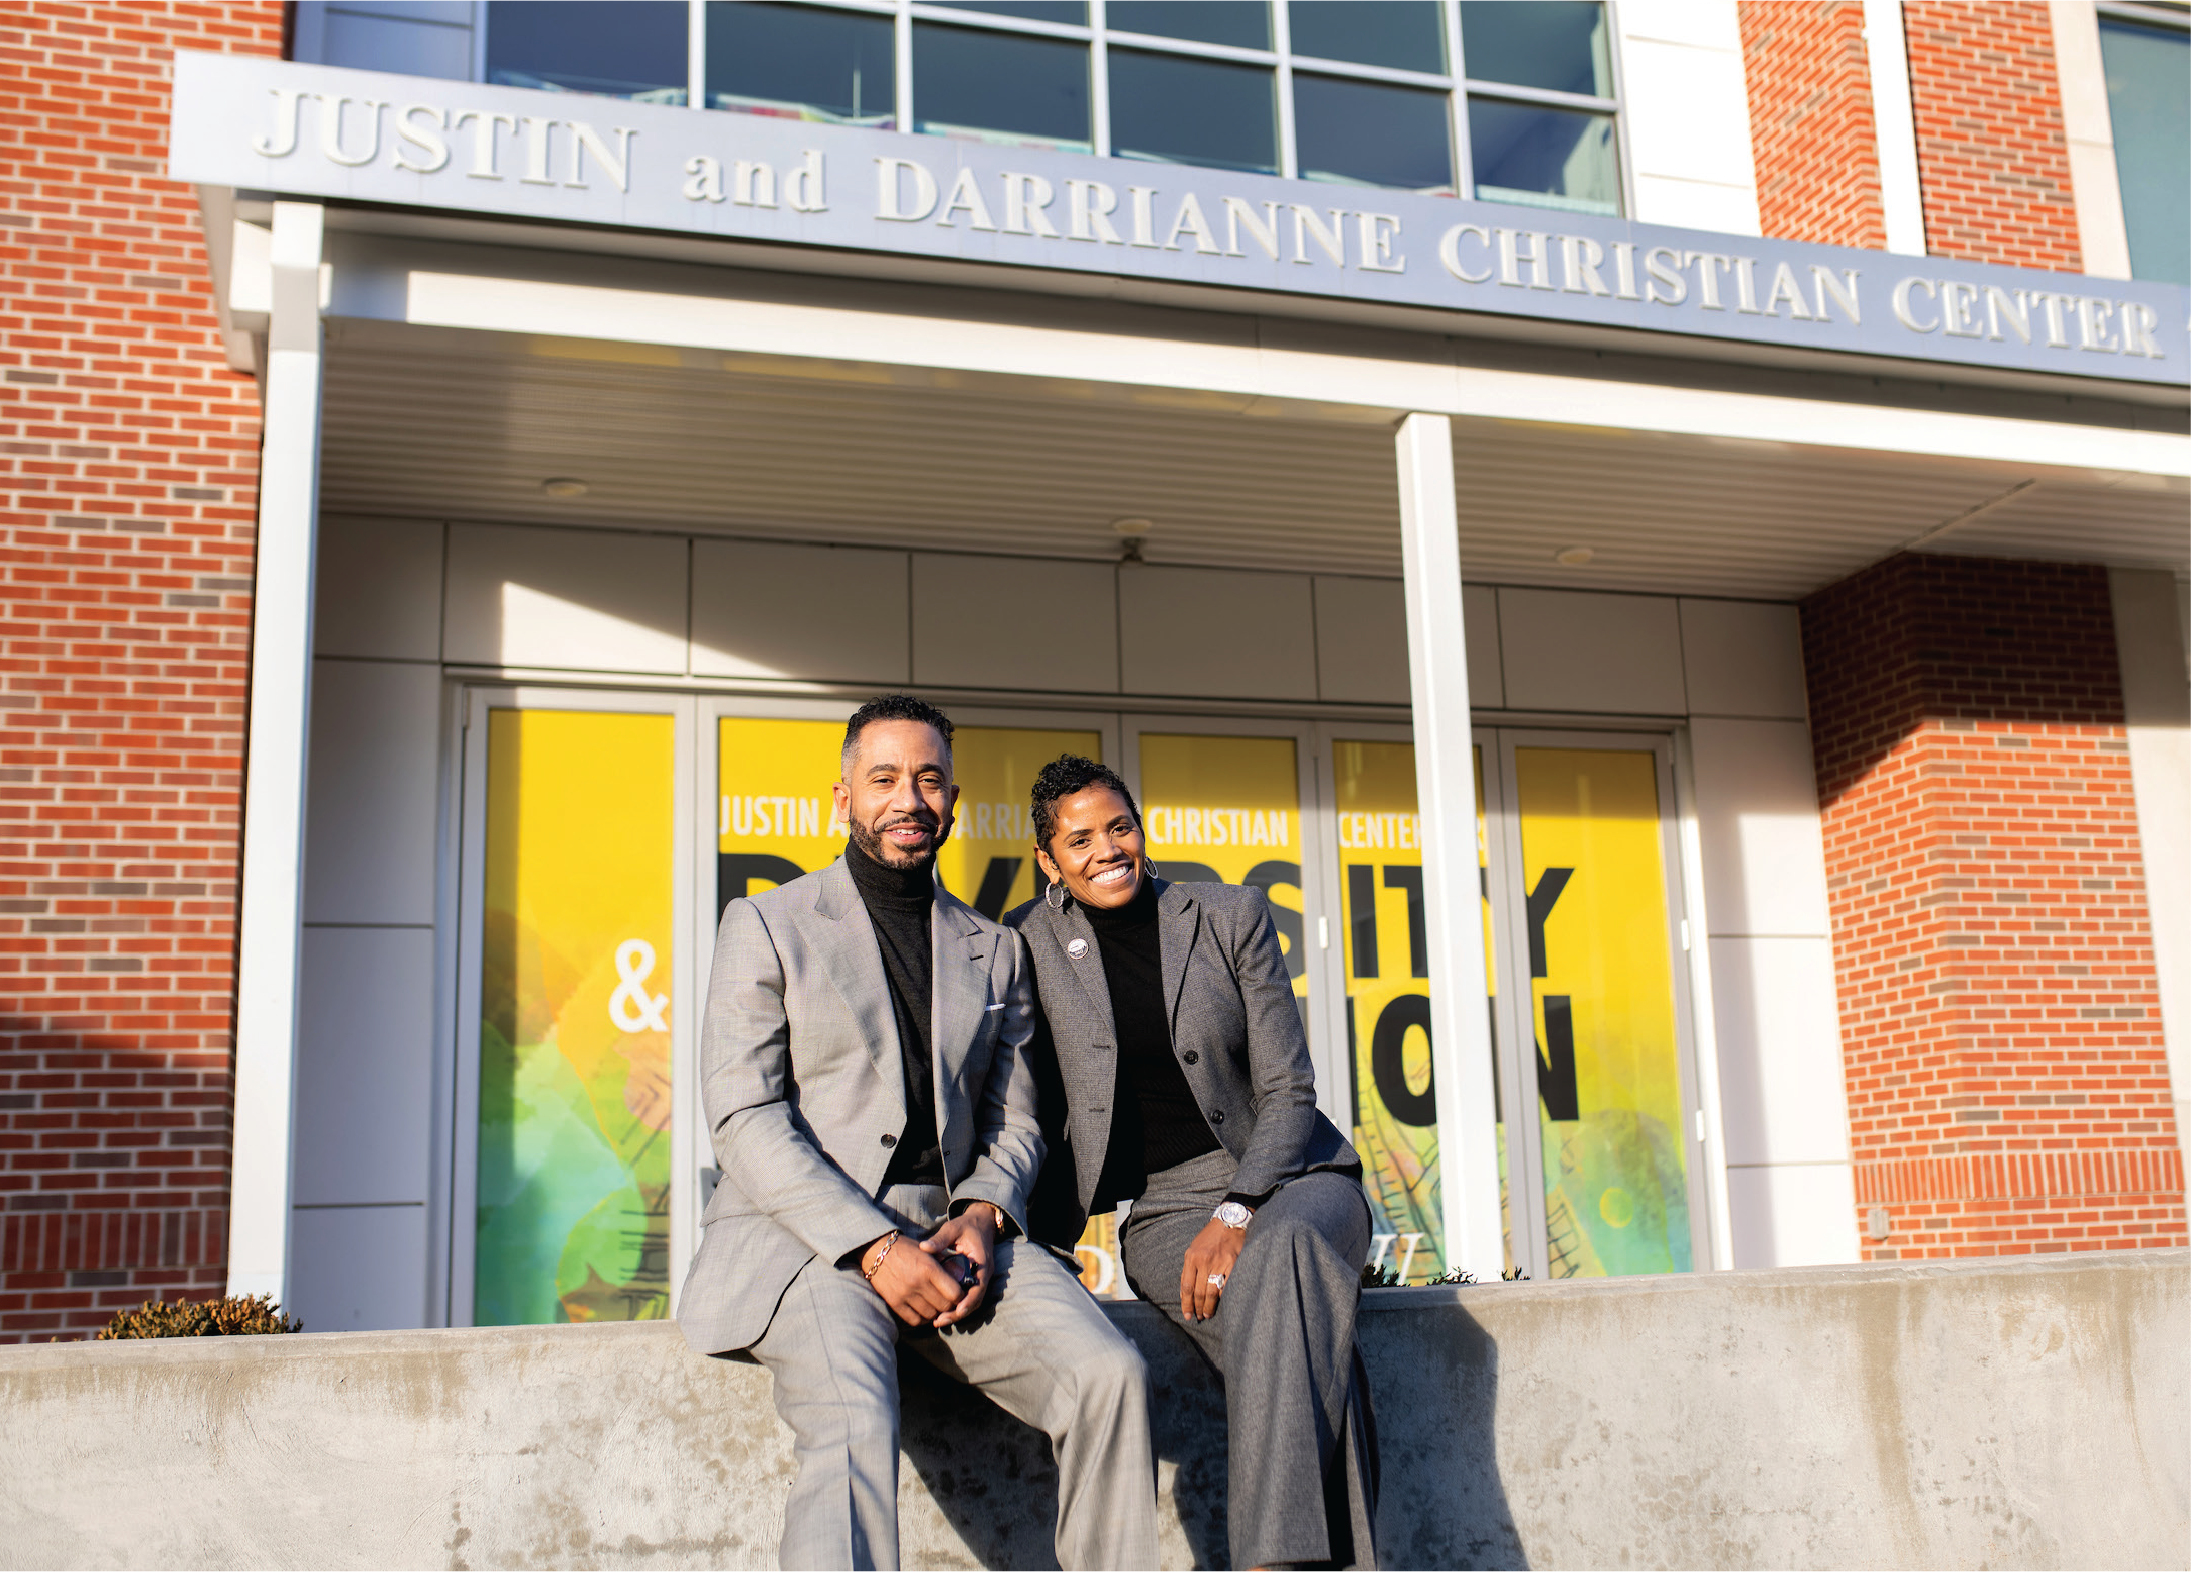 Justin and Darrianne Christian, a black couple both wearing grey suitsover black turtlenecks, sit in front of a building's entrance under a sign reading Justin and Darrianne Christian Center